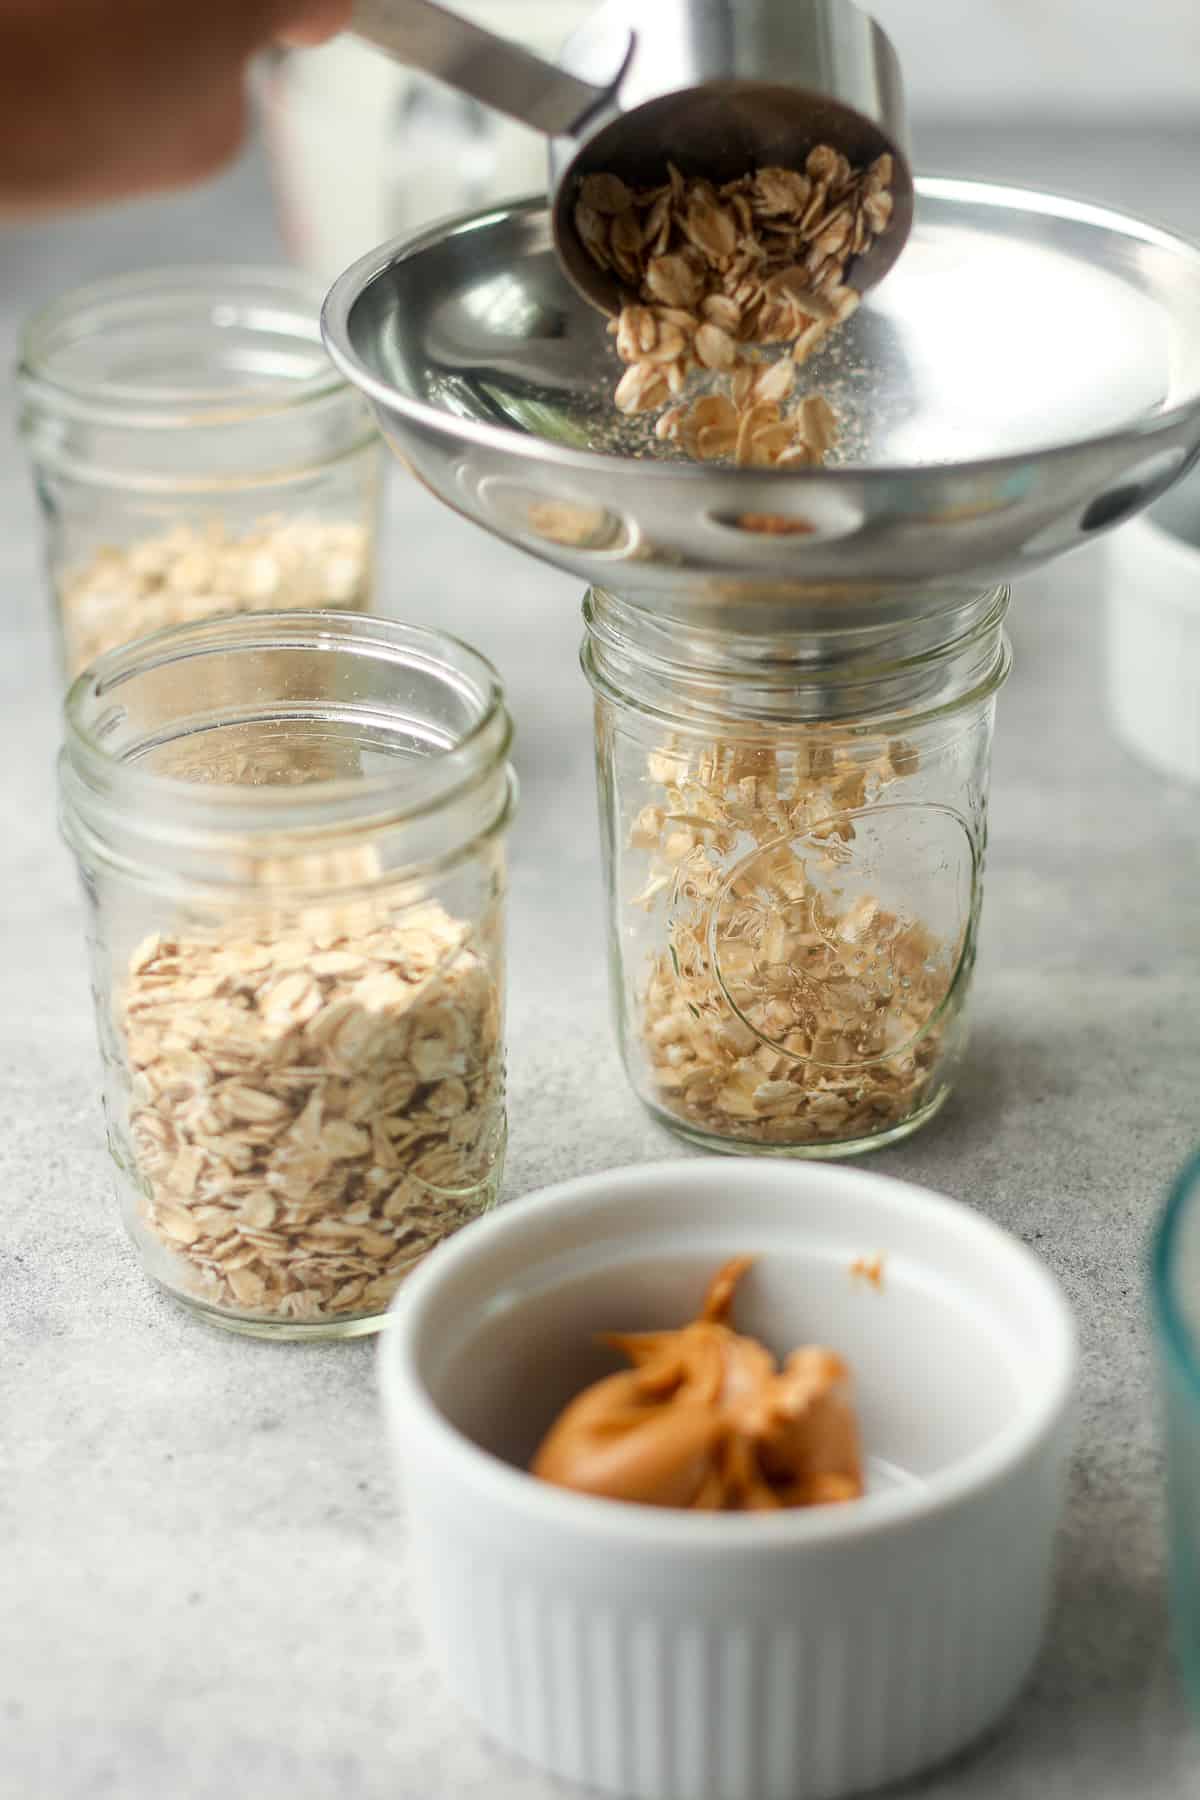 A scoop of oatmeal going into a mason jar.